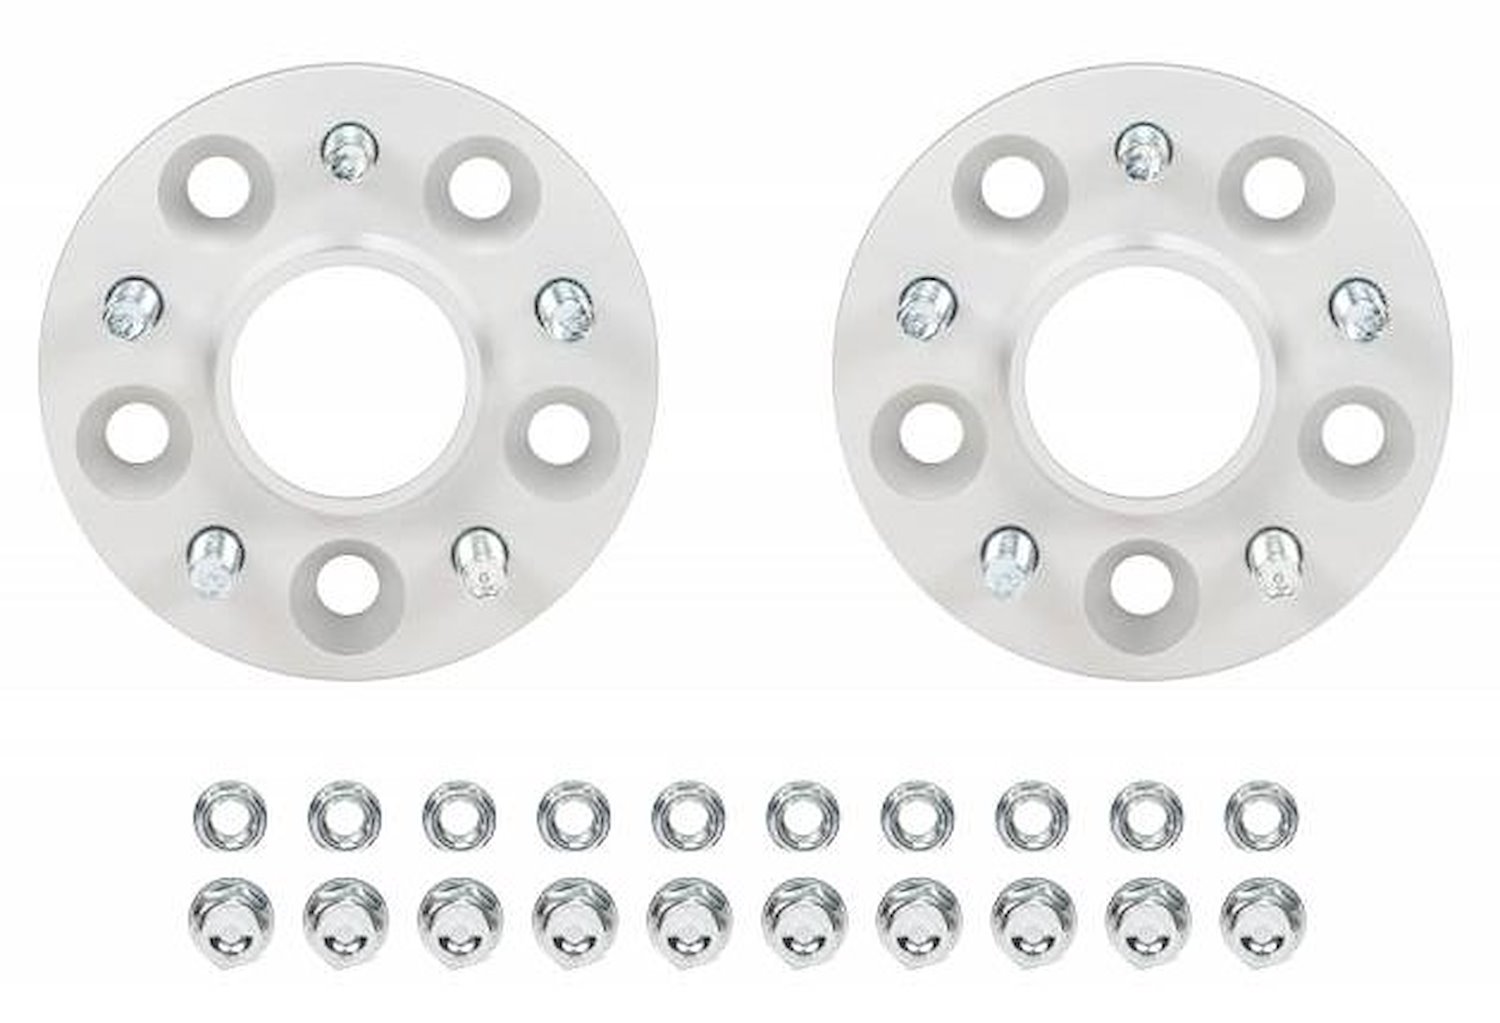 S90-4-30-044 30 mm Pro-Spacer Kit for Select Late Model Chevy Camaro